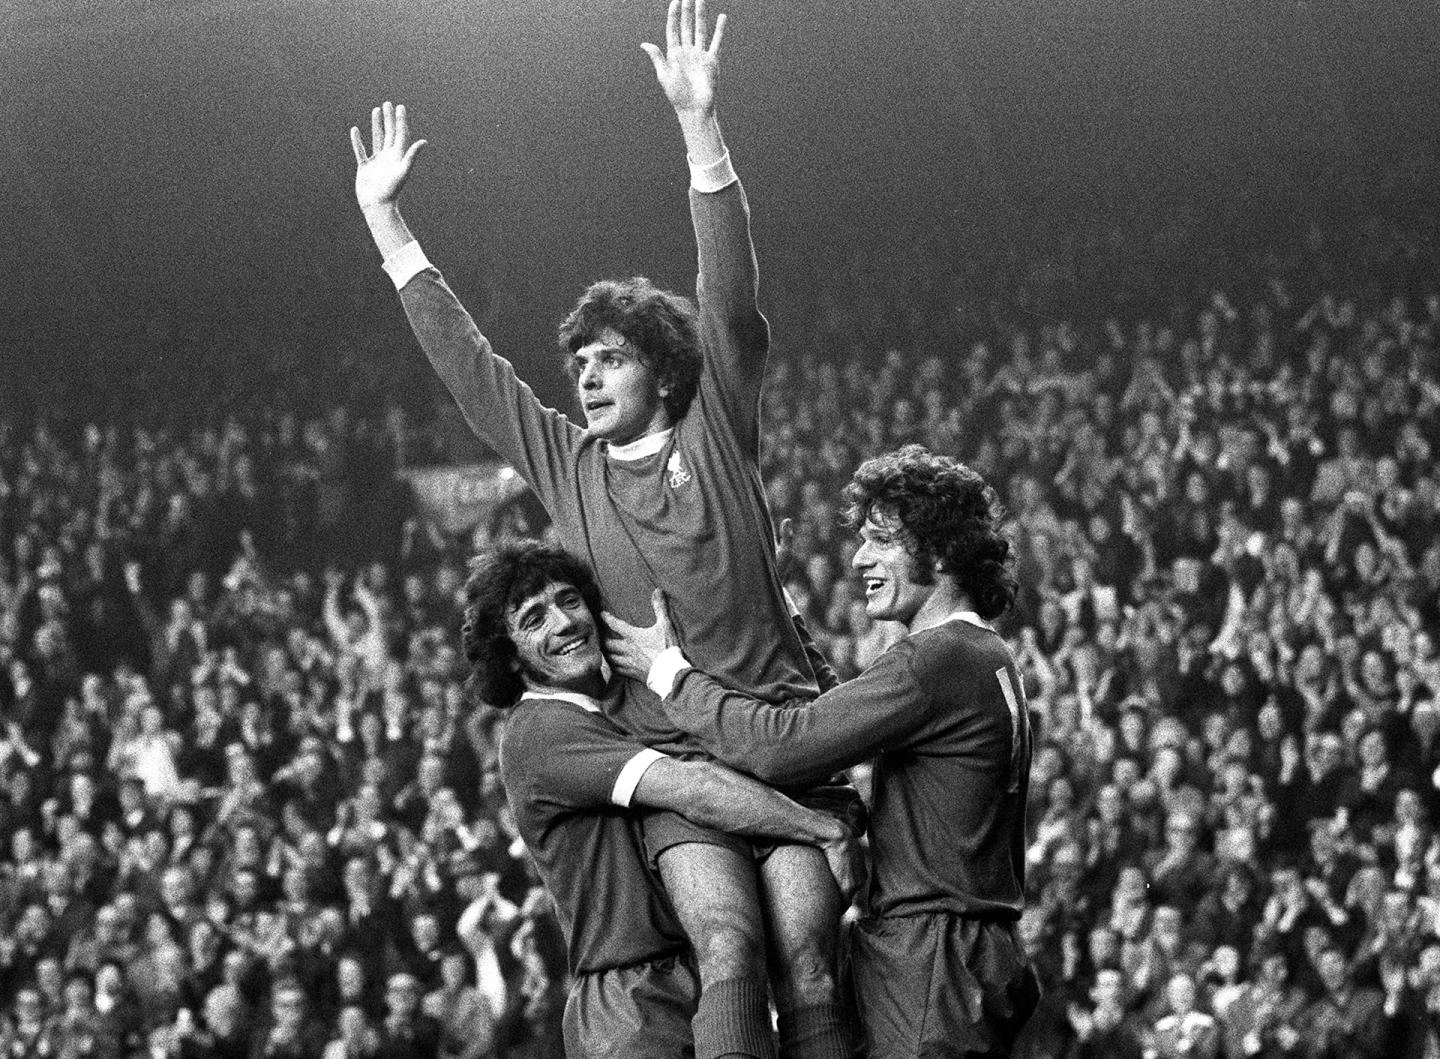 The Reds celebrate during a 4-0 defeat of Manchester City at Anfield